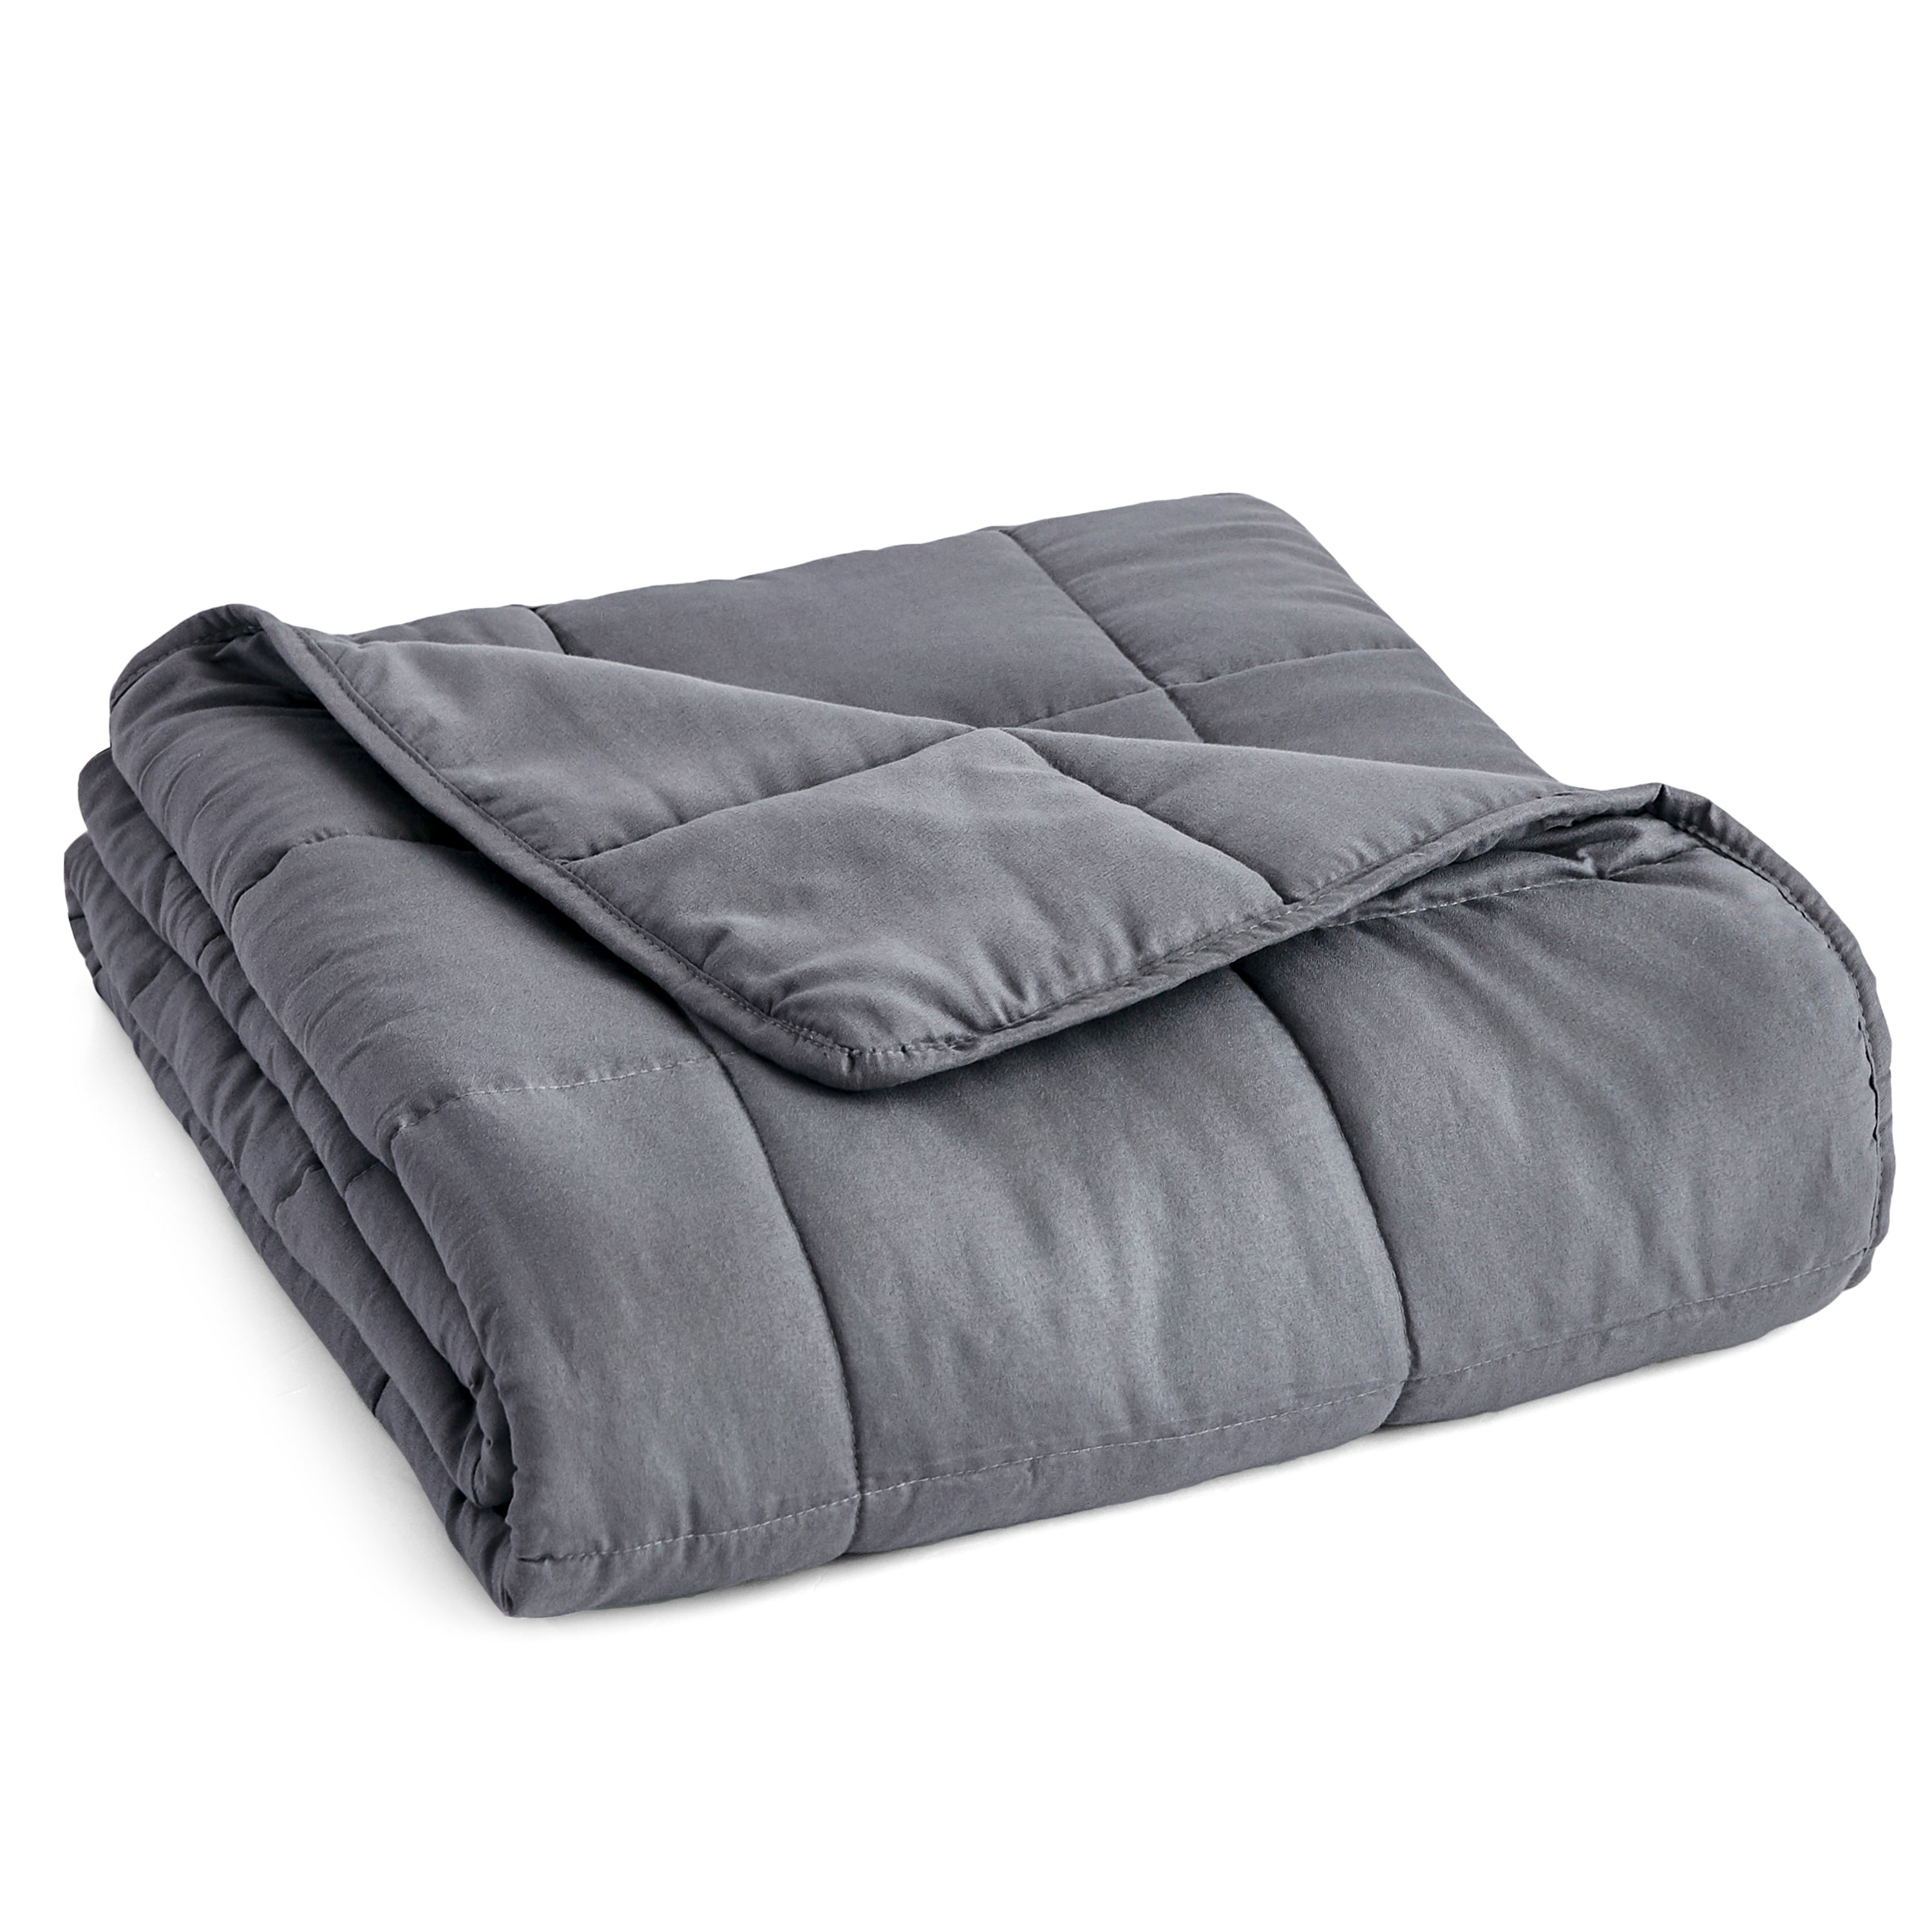 Classic Microfiber Weighted Blanket- 12 lb